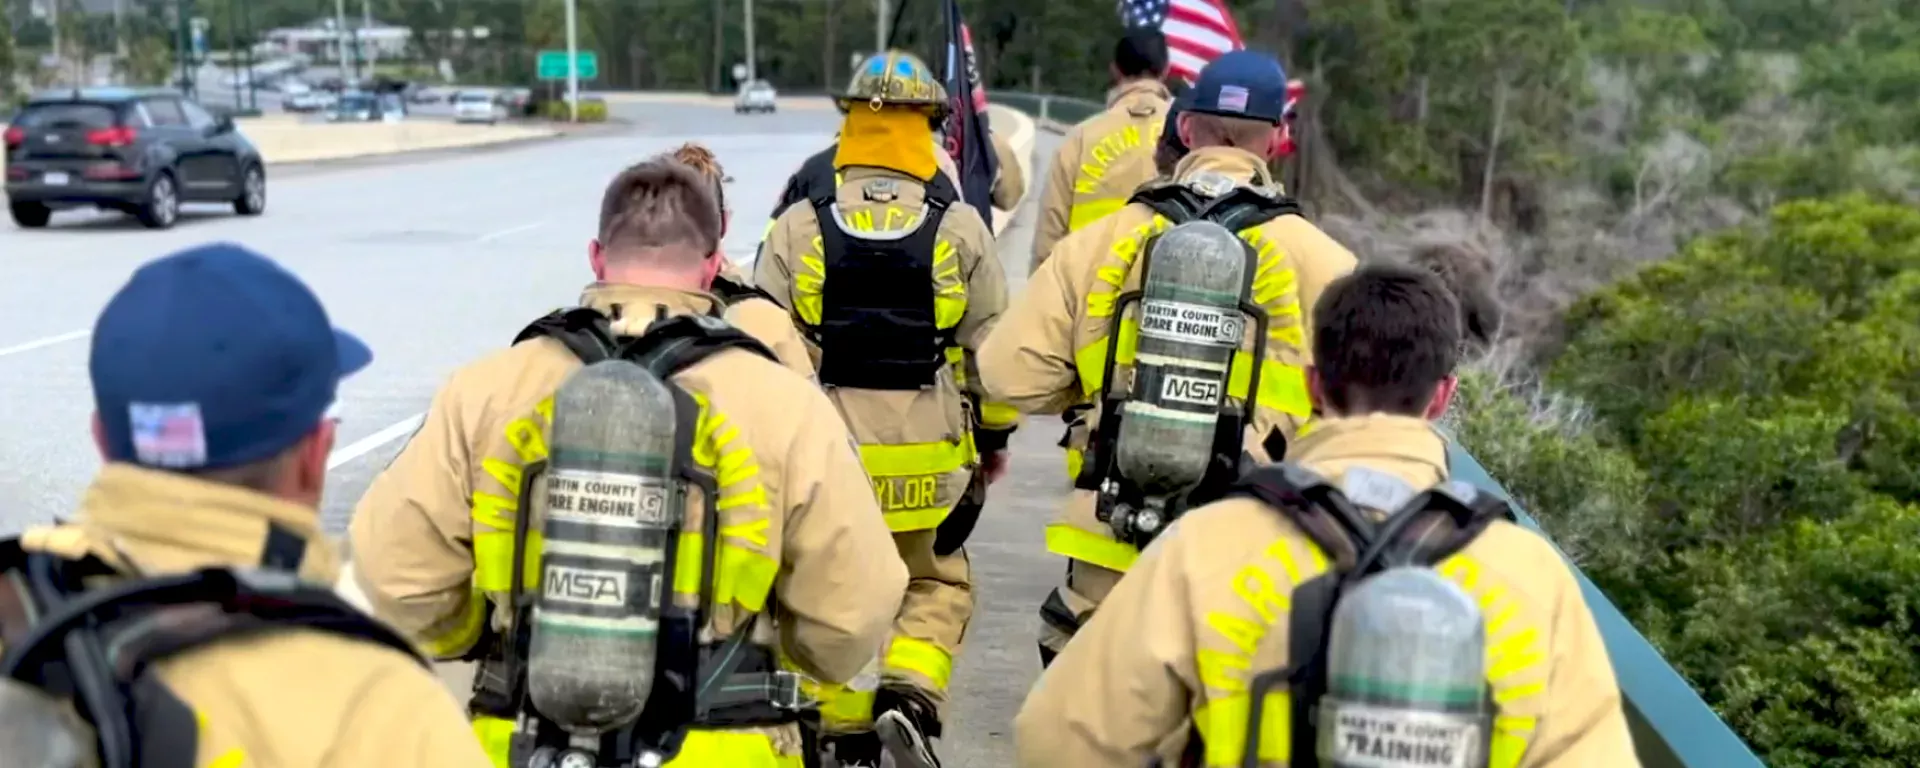 A group of firefighters training together in fire gear